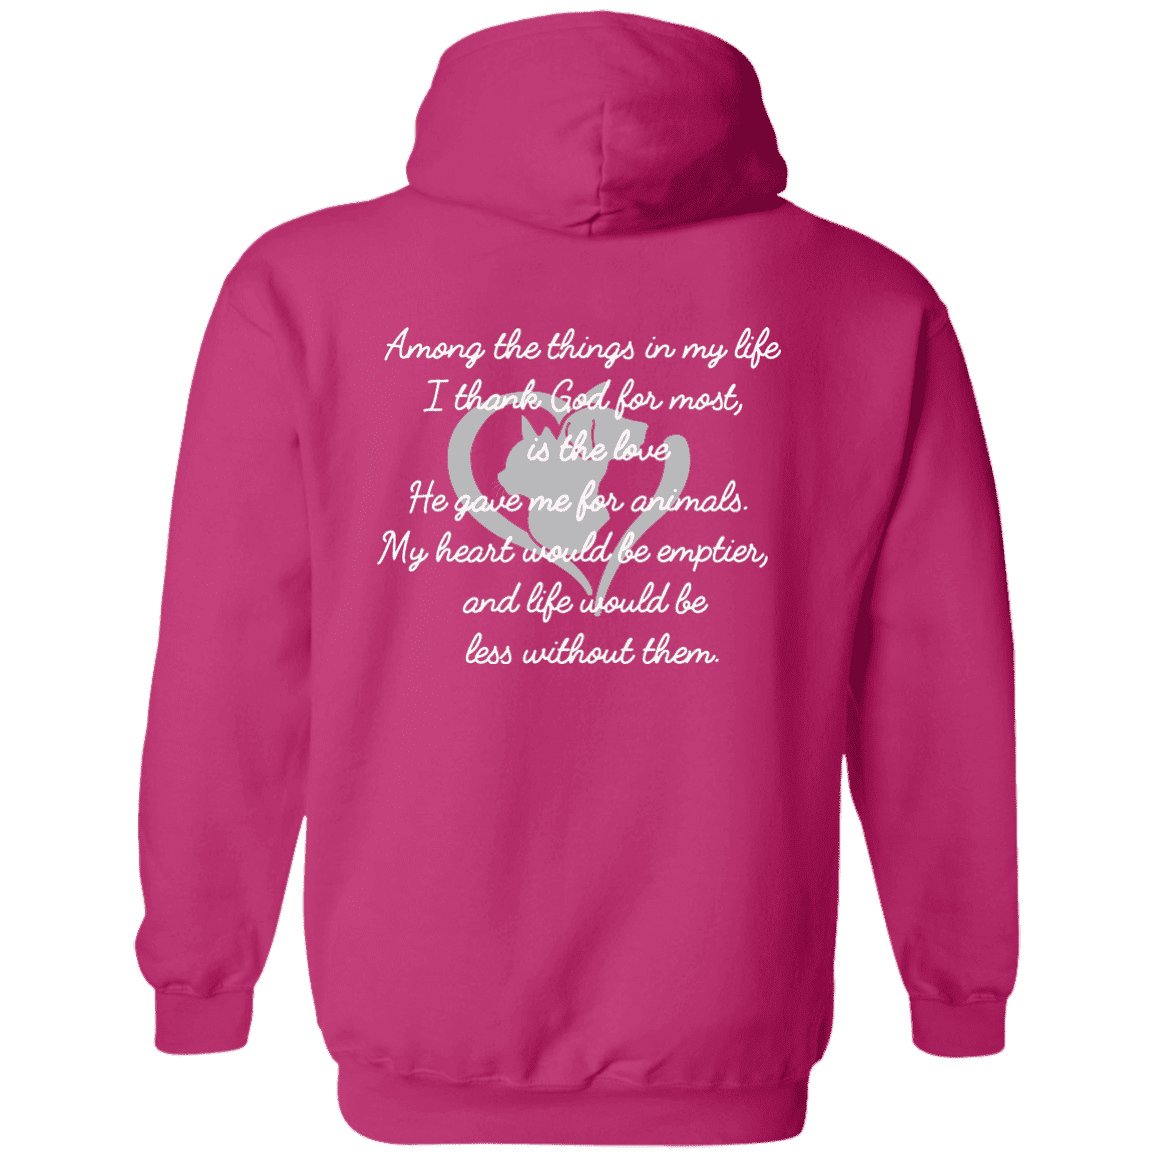 Among The Things In Life God - Hoodie.